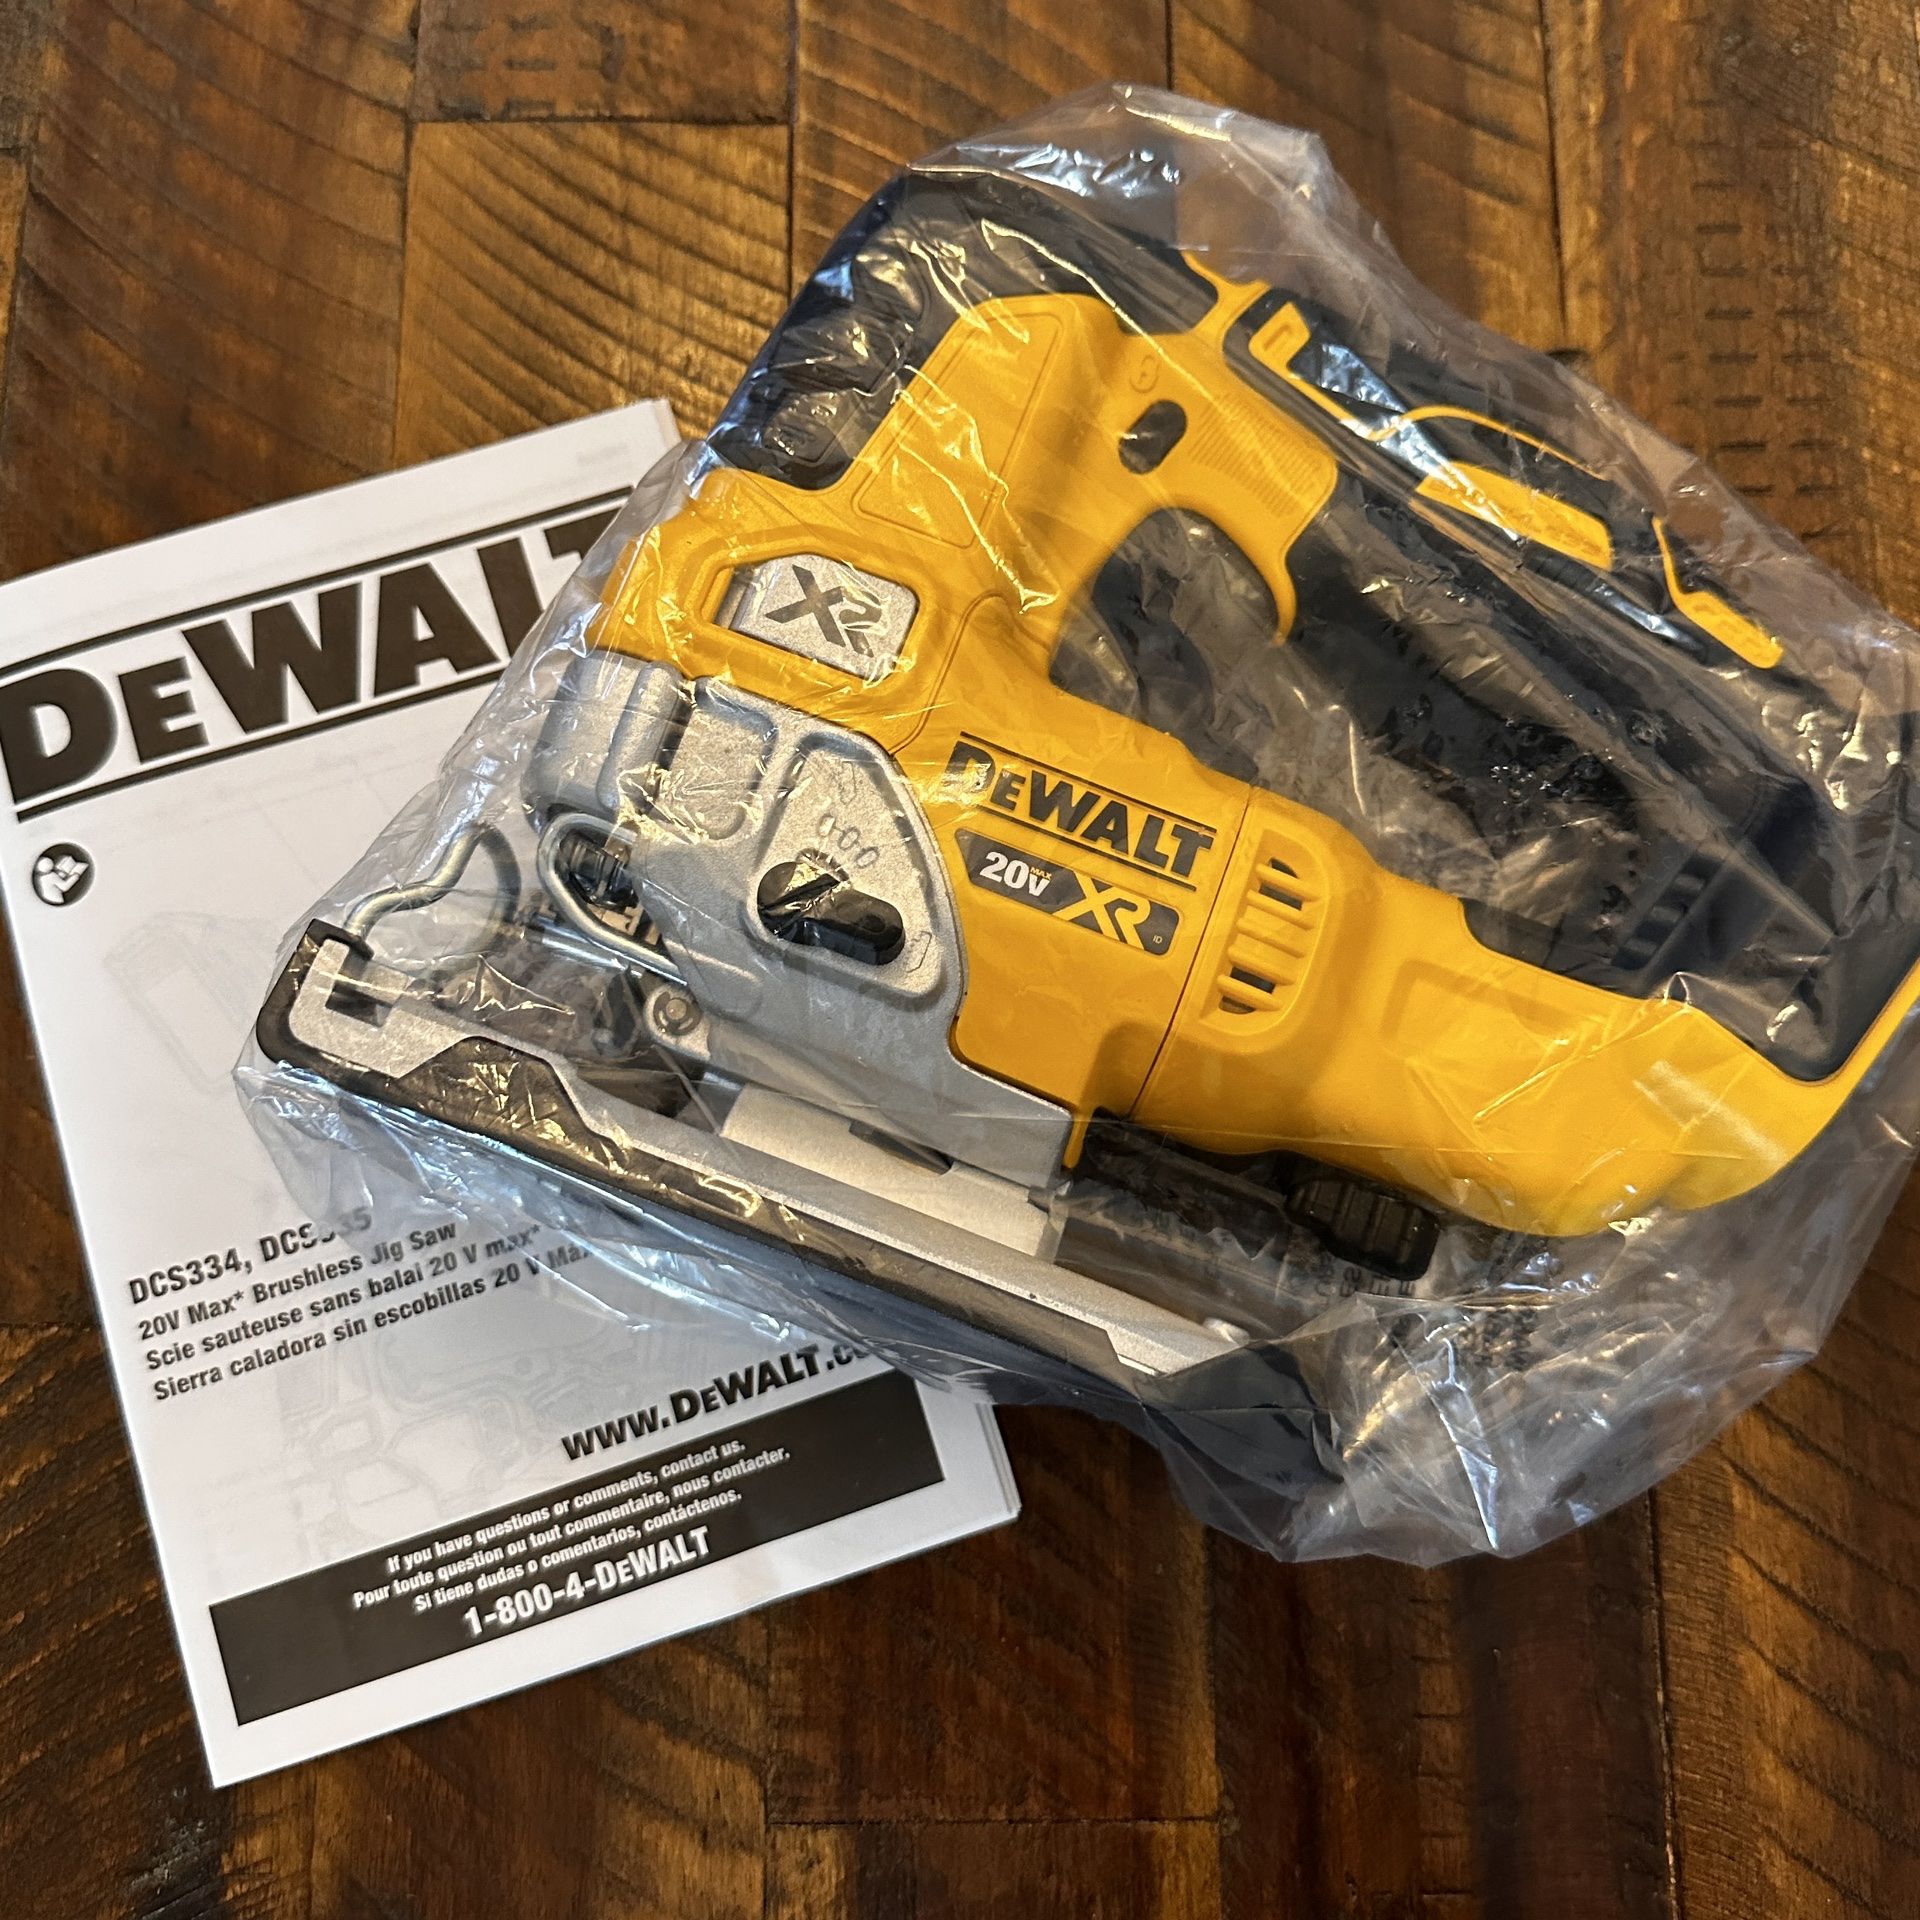 Brand NEW DeWALT XR 20vMAX Brushless 7-Speed Cordless Jigsaw (Tool Only)  DCS334B for Sale in Cornwall Borough, PA OfferUp